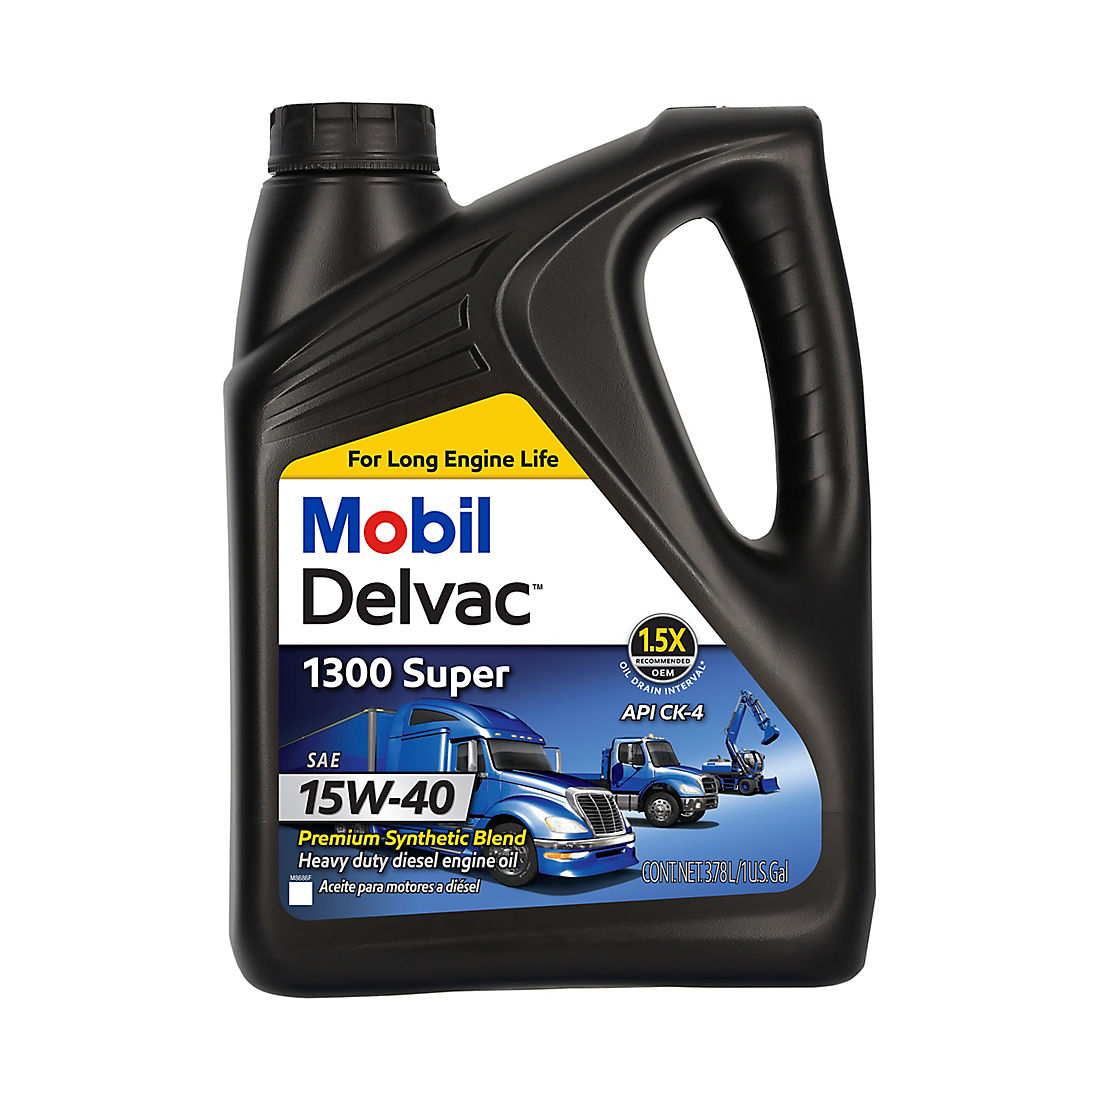 Масло делвак 10w 40. Mobil Delvac 10w 40 Diesel. Mobil 10w 40 Synthetic engine Oil. Мобил Делвак 10w 50. Oil Motor SAE 15w40.